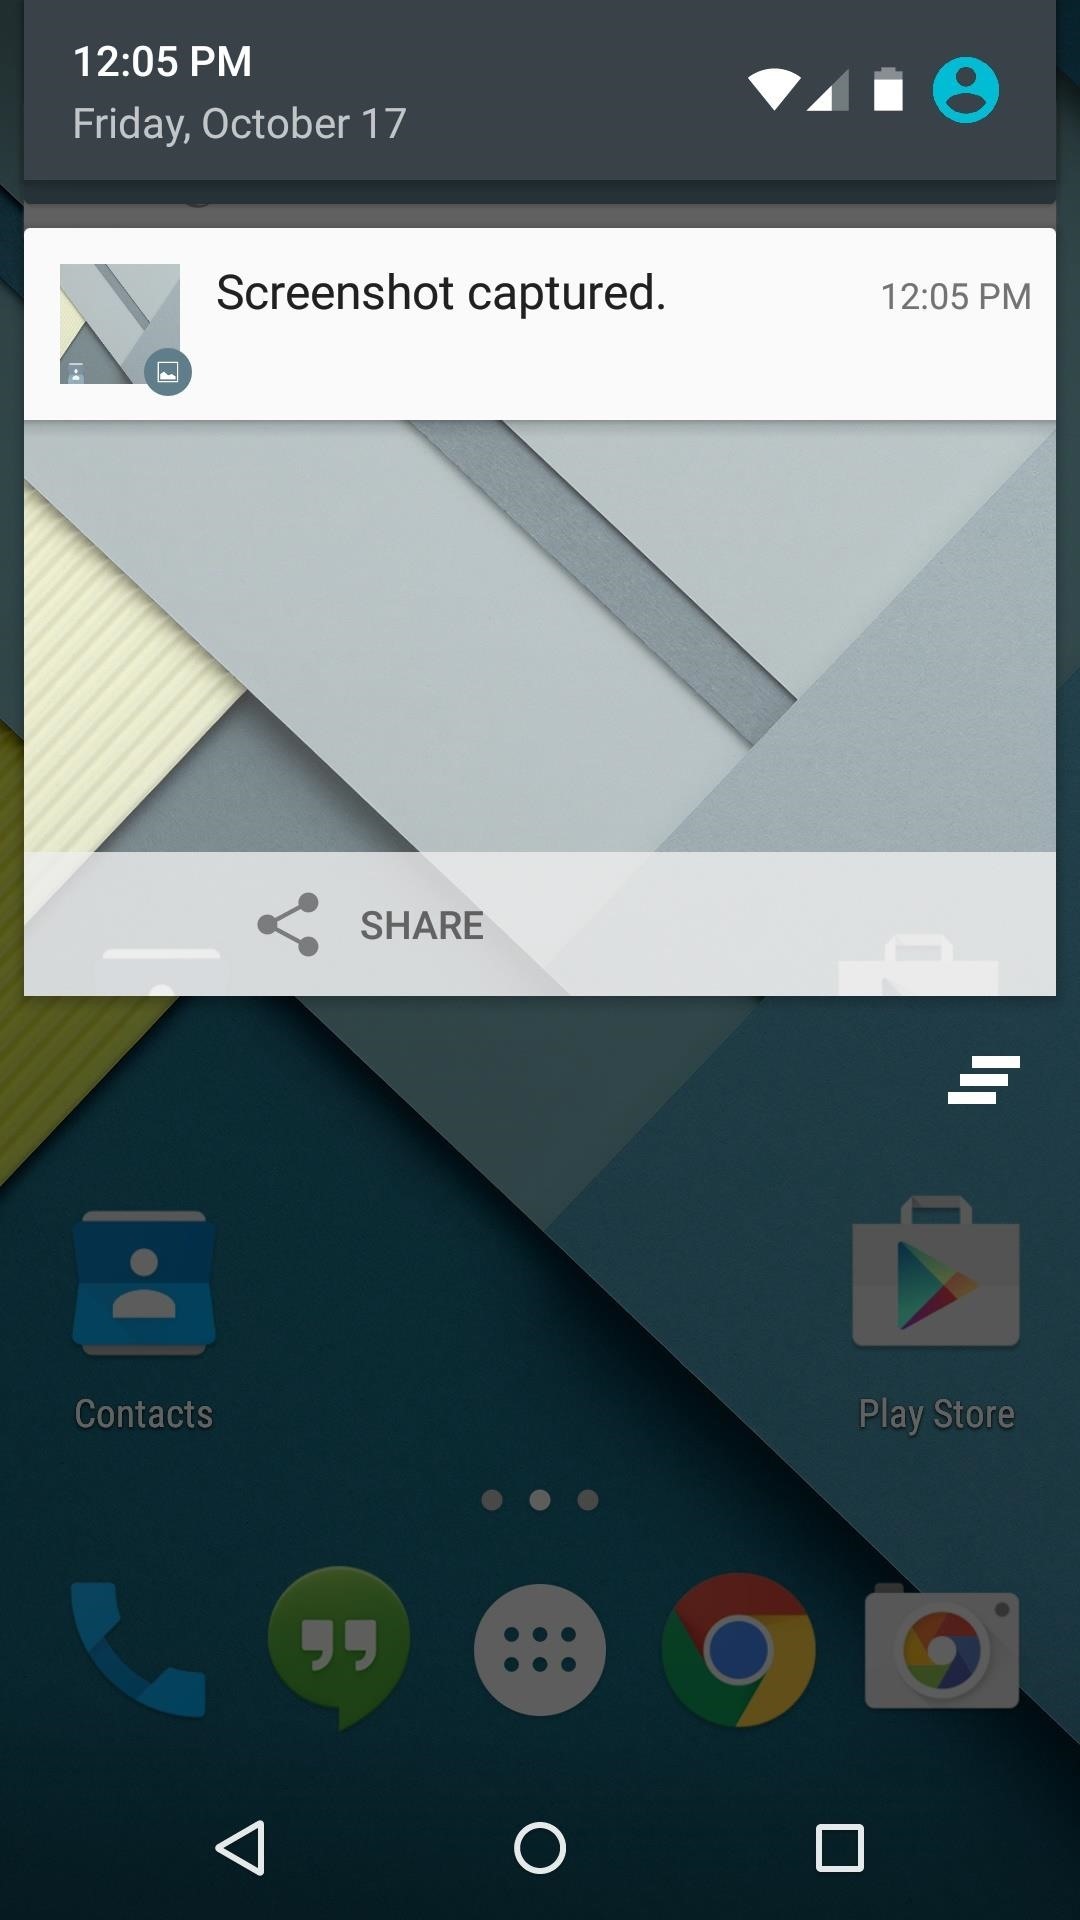 An In-Depth Visual Look at Android 5.0 "Lollipop"